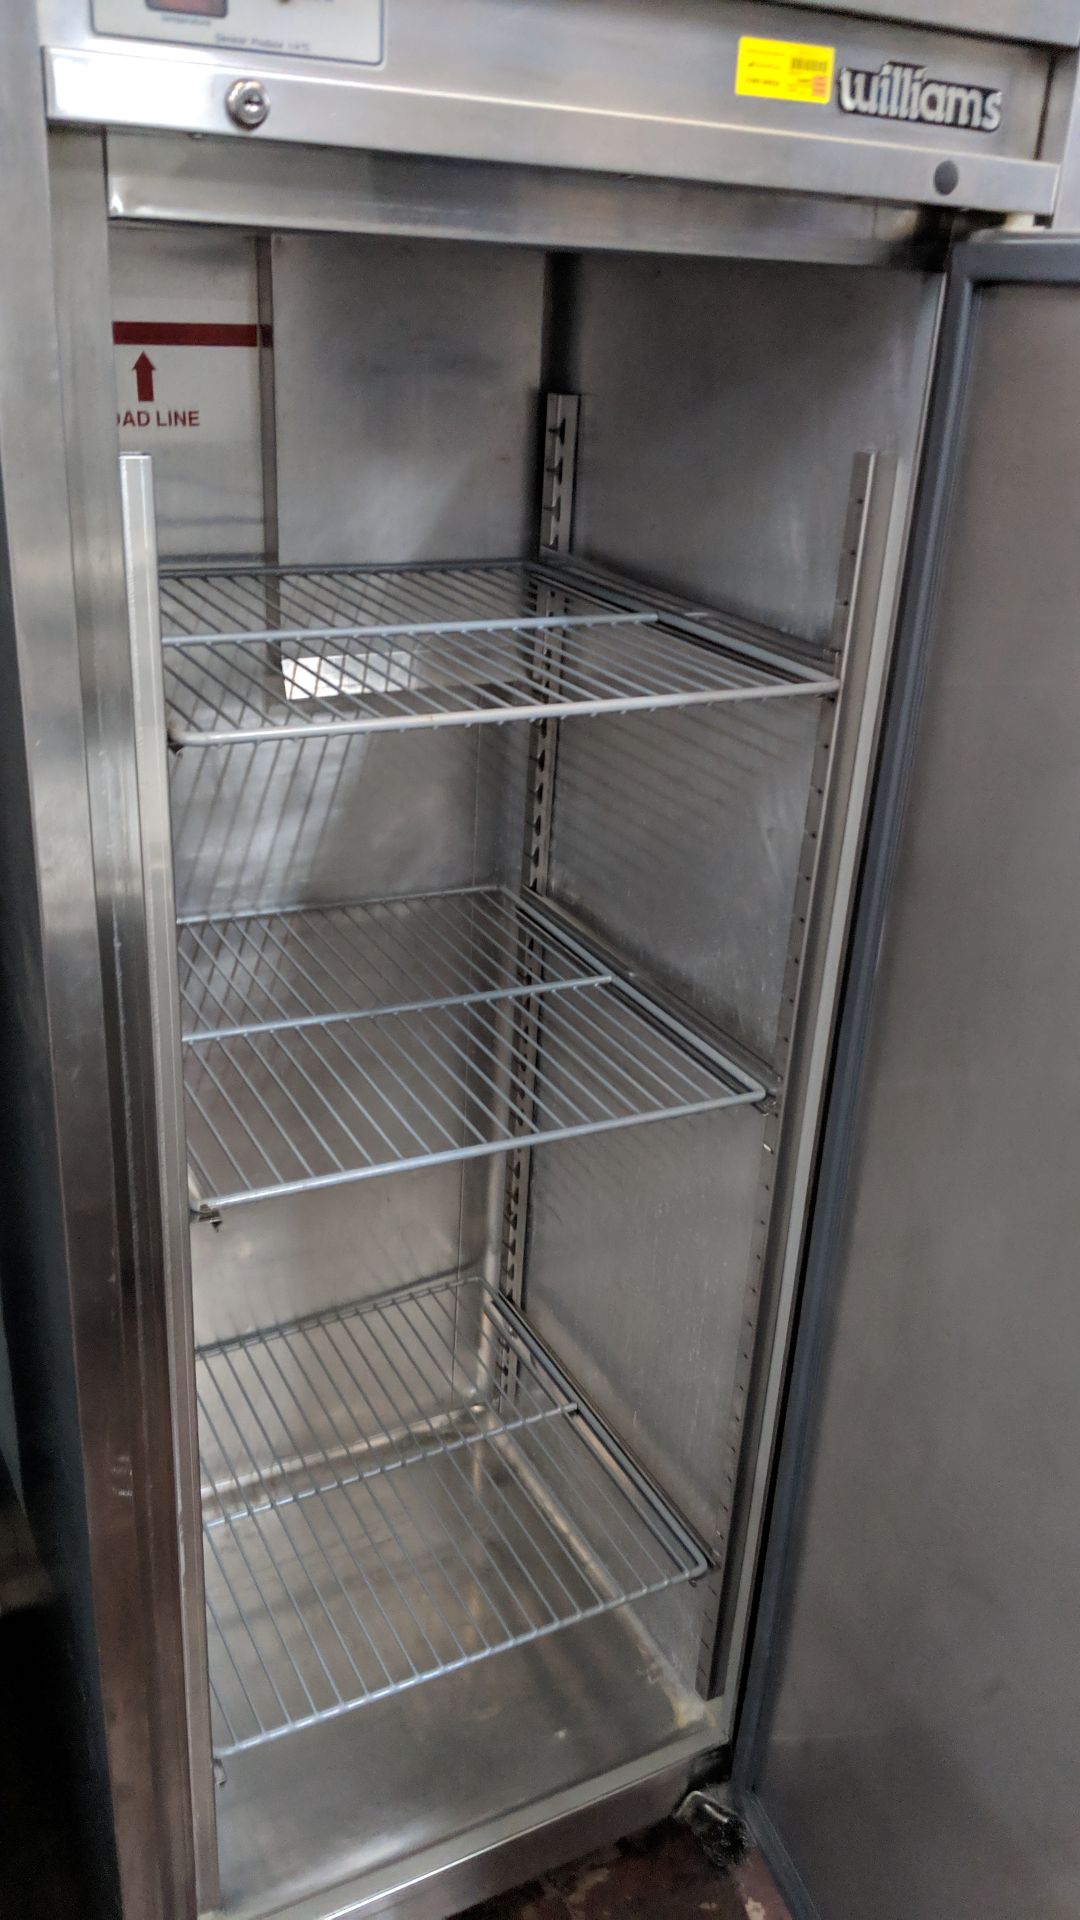 Williams HDI Diamond stainless steel tall fridge IMPORTANT: Please remember goods successfully bid - Image 2 of 3